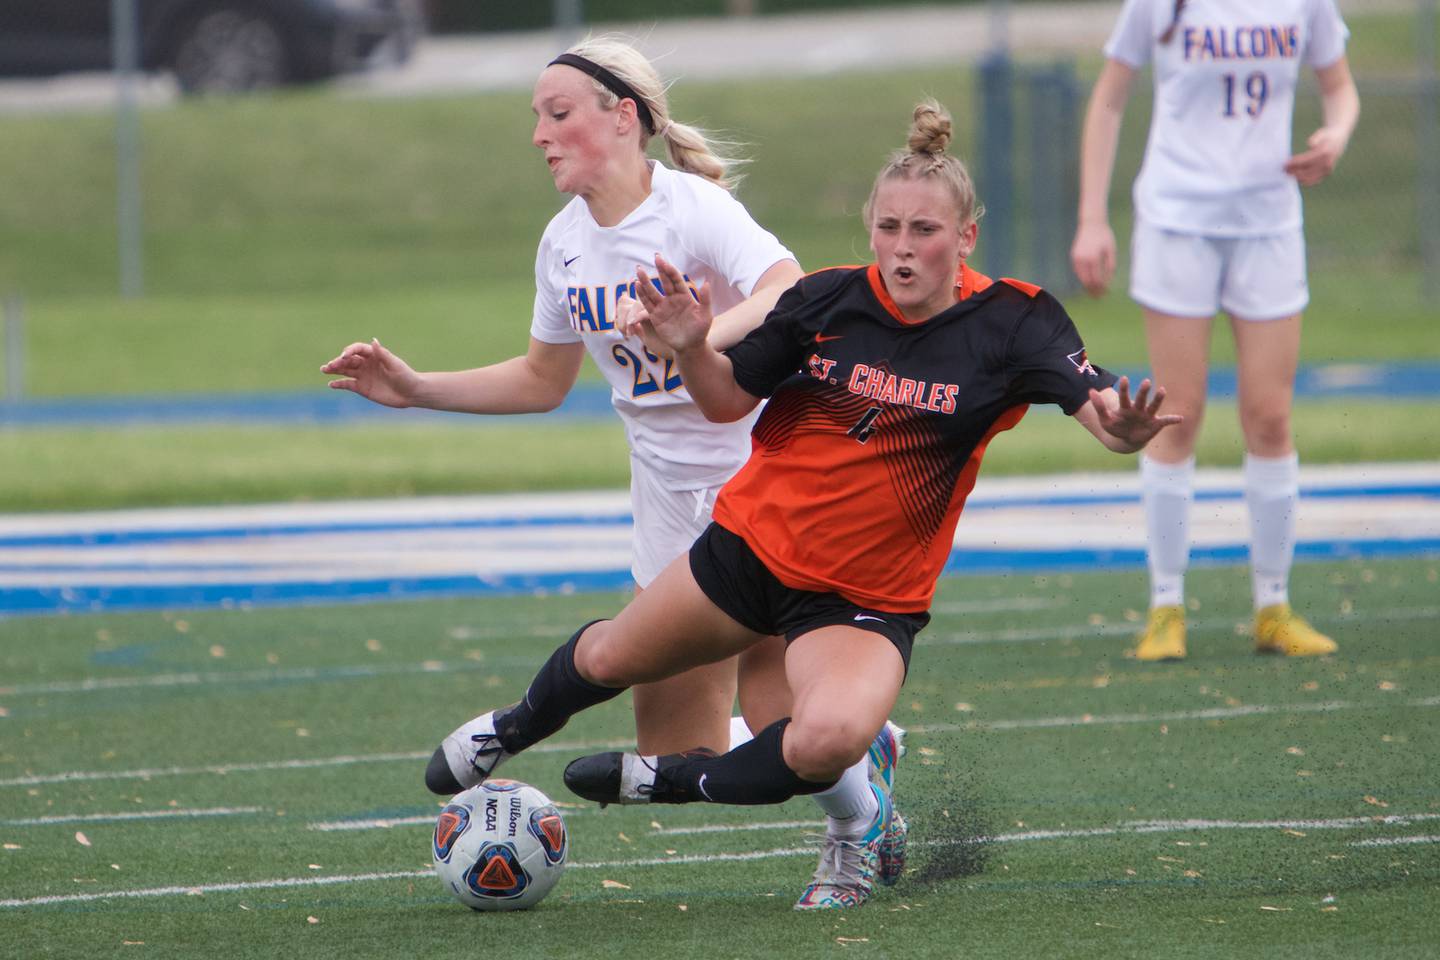 St. Charles East's Grace Williams looks to maintain control of the ball against Wheaton North's Rowan Smith at the Class 3A Regional Final in Wheaton on May 20,2022.